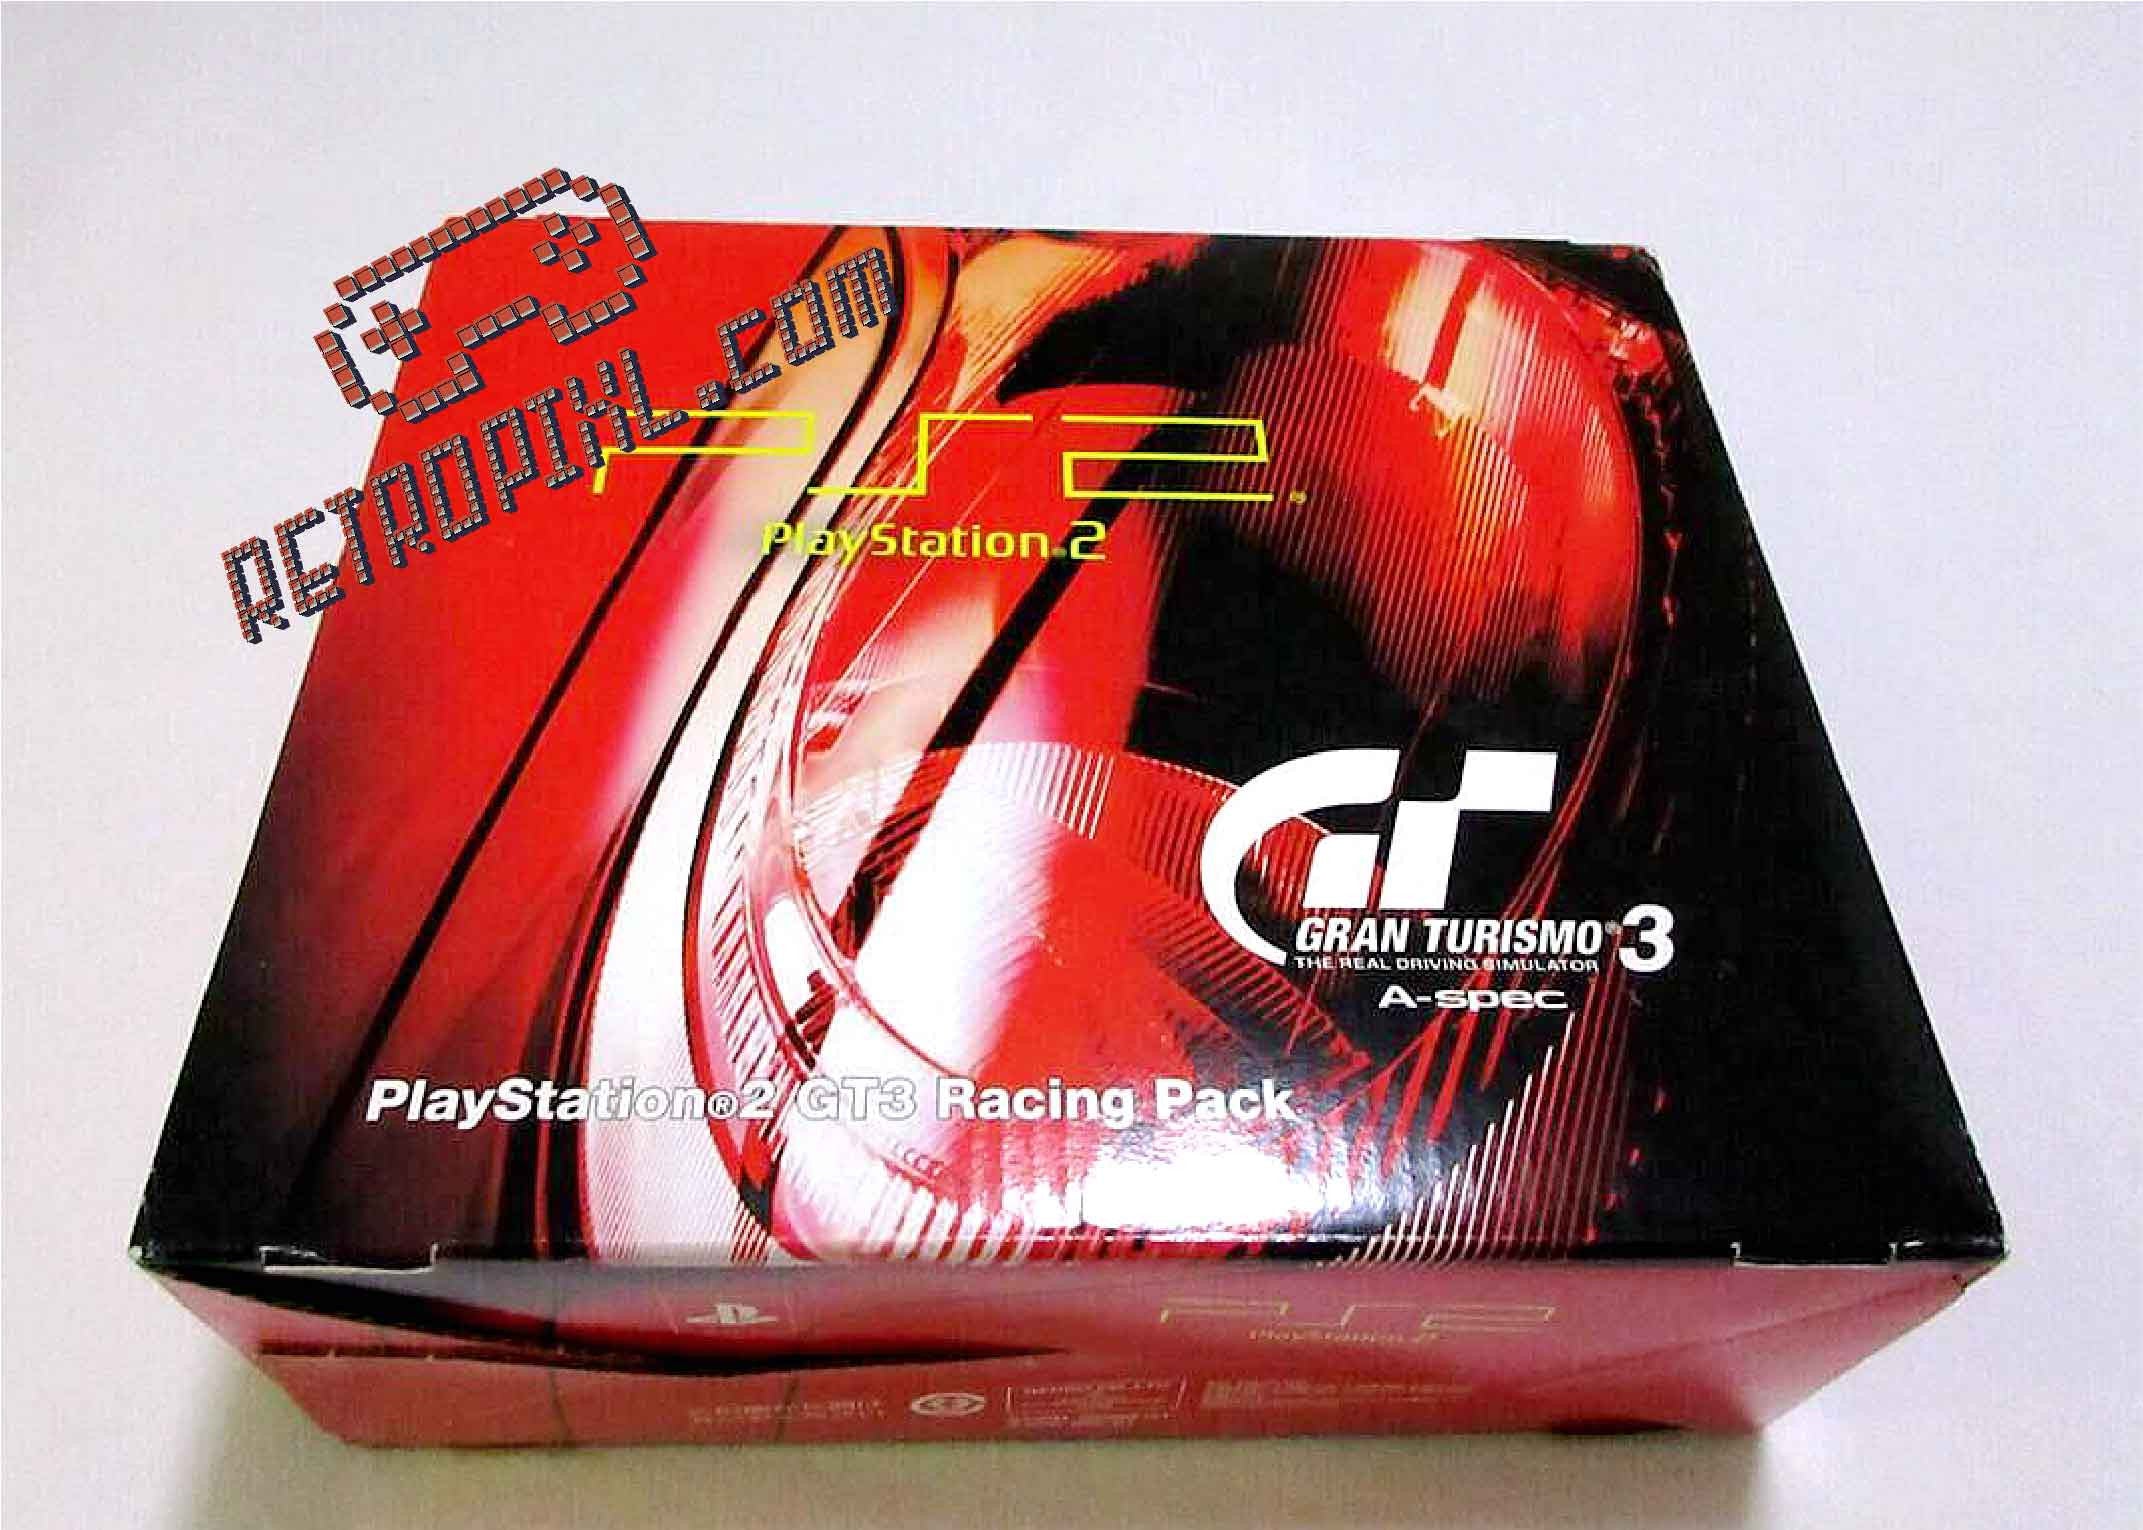 Sony Playstation 2 (PS2) Gran Turismo 3 Pack LIMITED EDITION